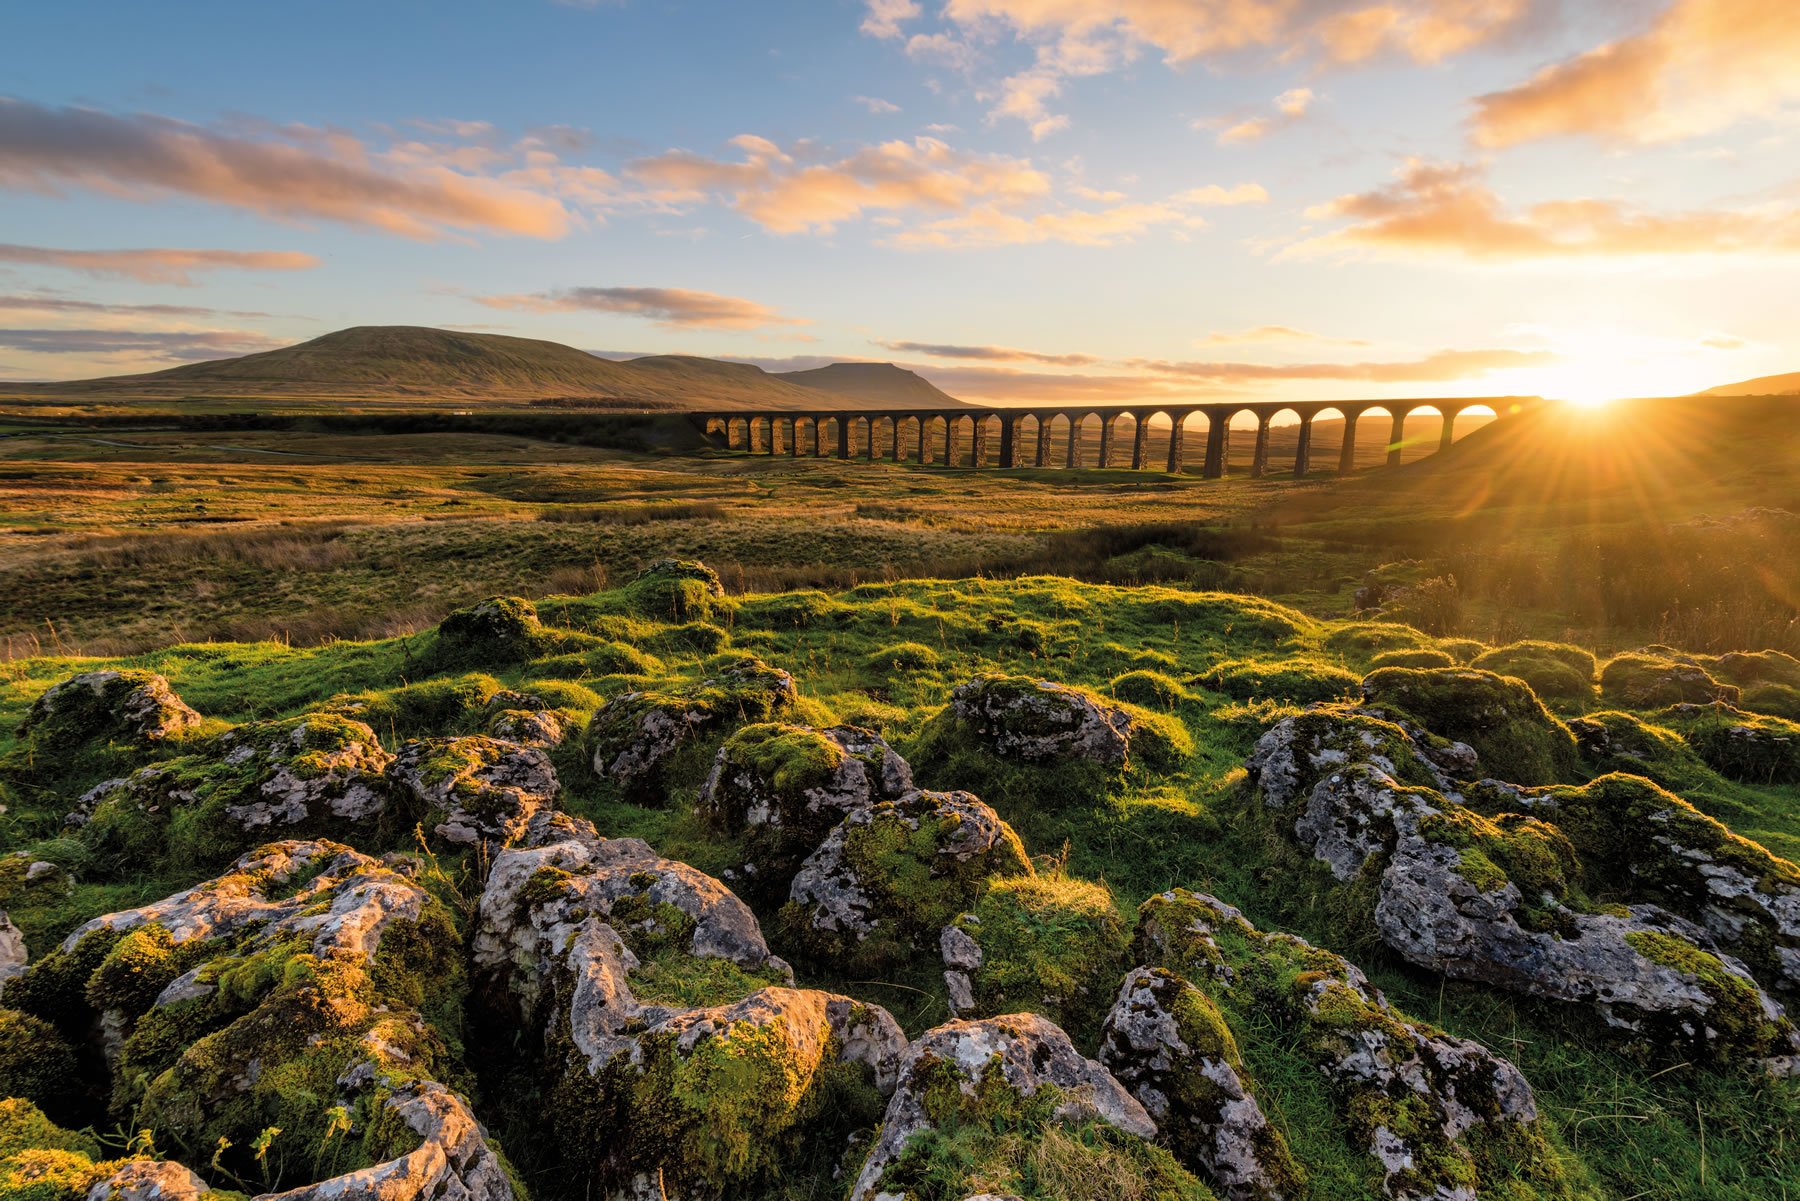 Image name ribblehead viaduct the 17 image from the post Visitor Attractions in Yorkshire.com.